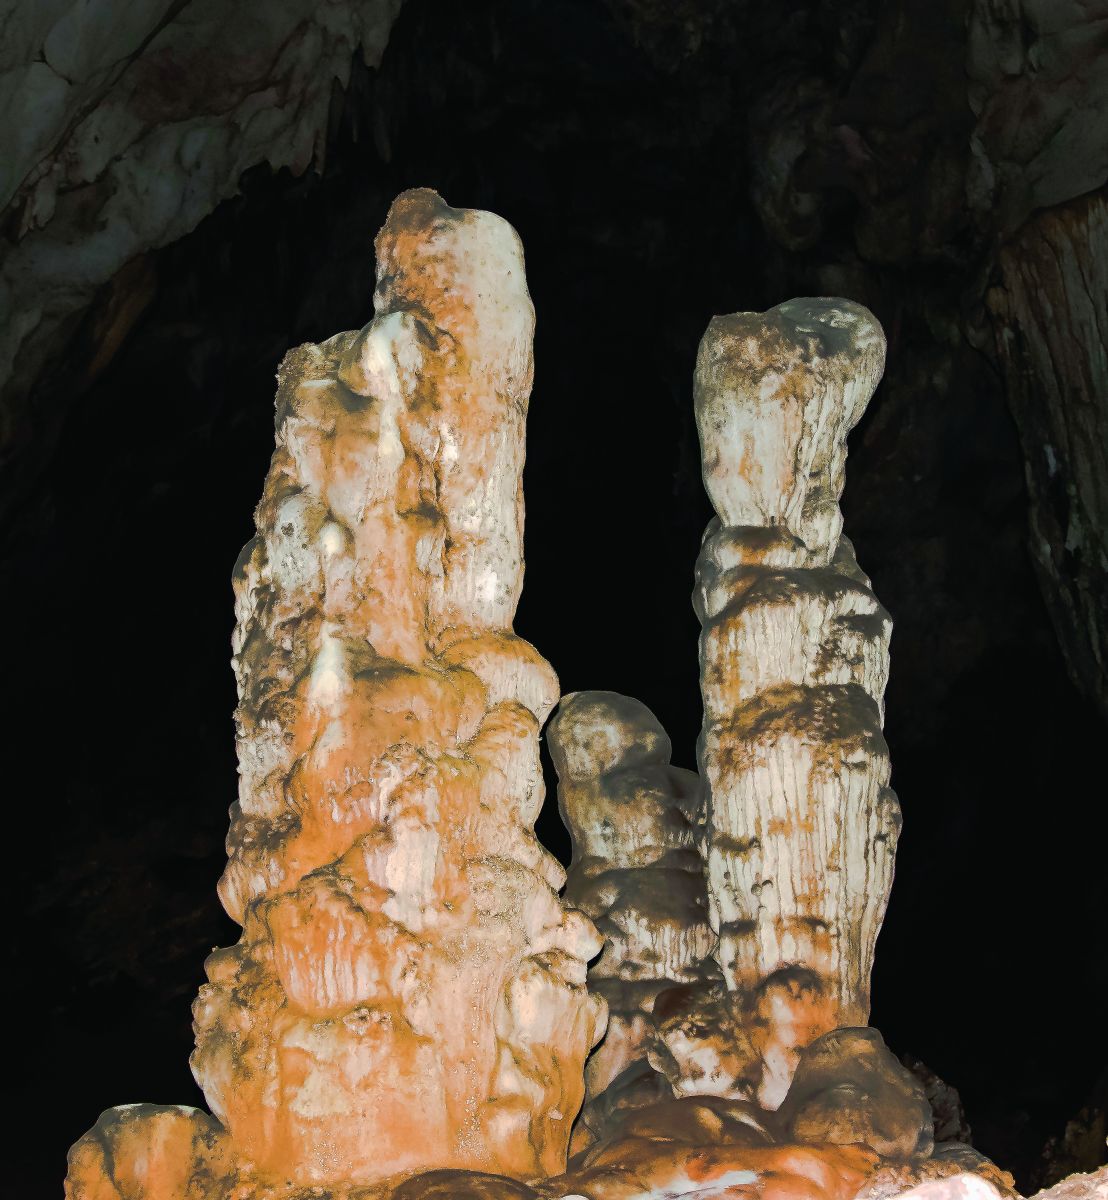 cave in Pang Ma Pha District in the province of Mae Hong Son